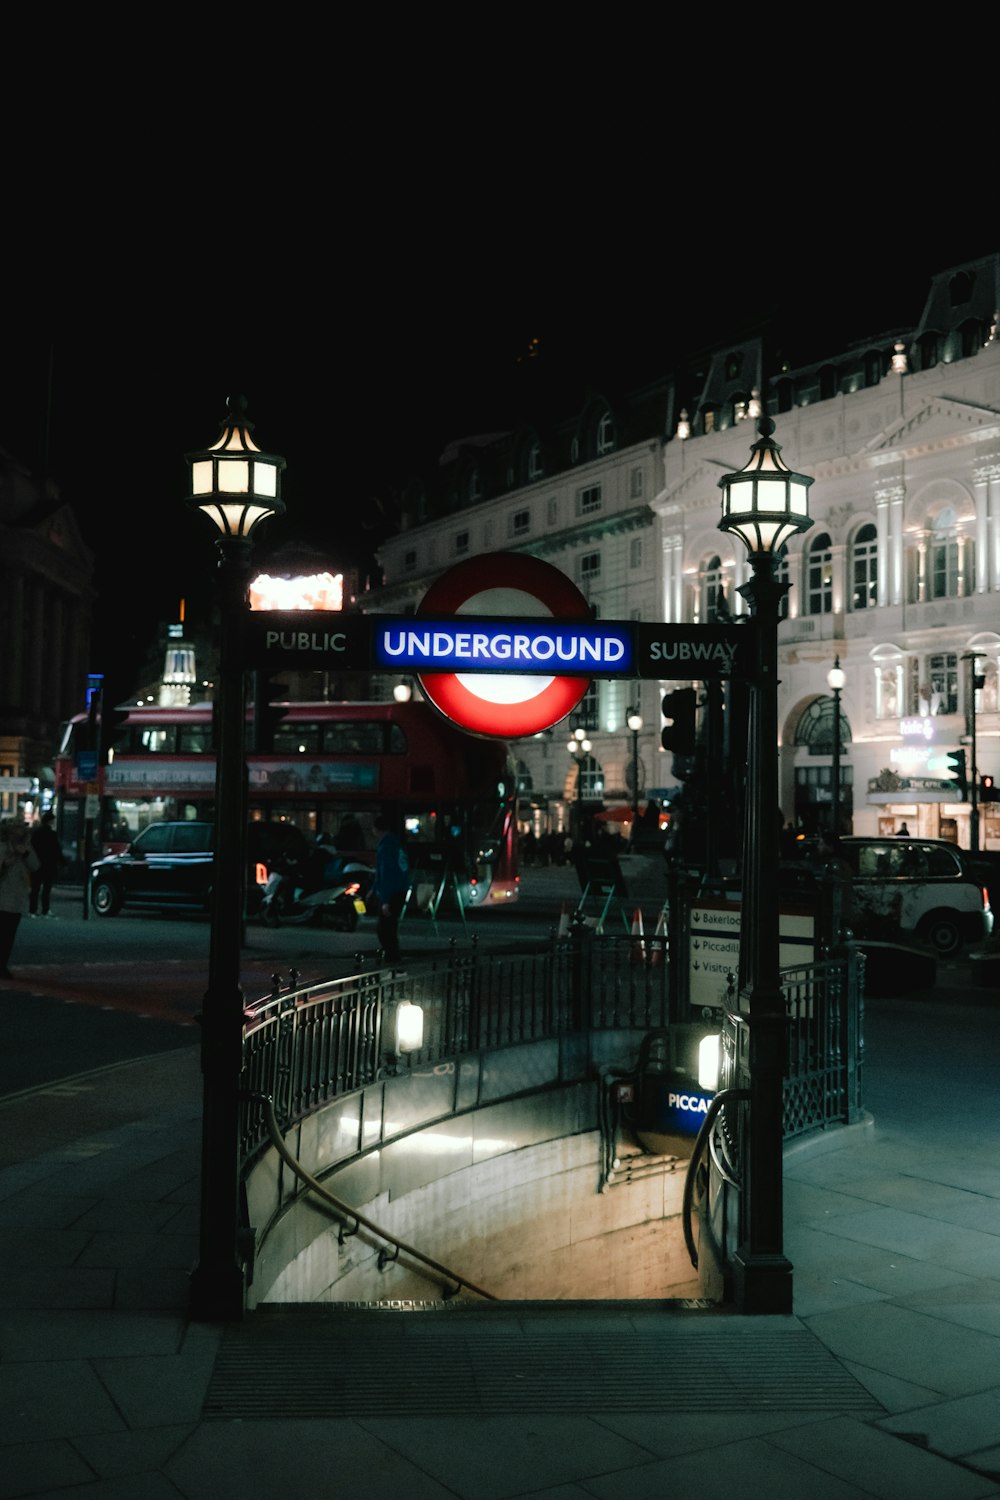 a street scene with focus on the underground sign